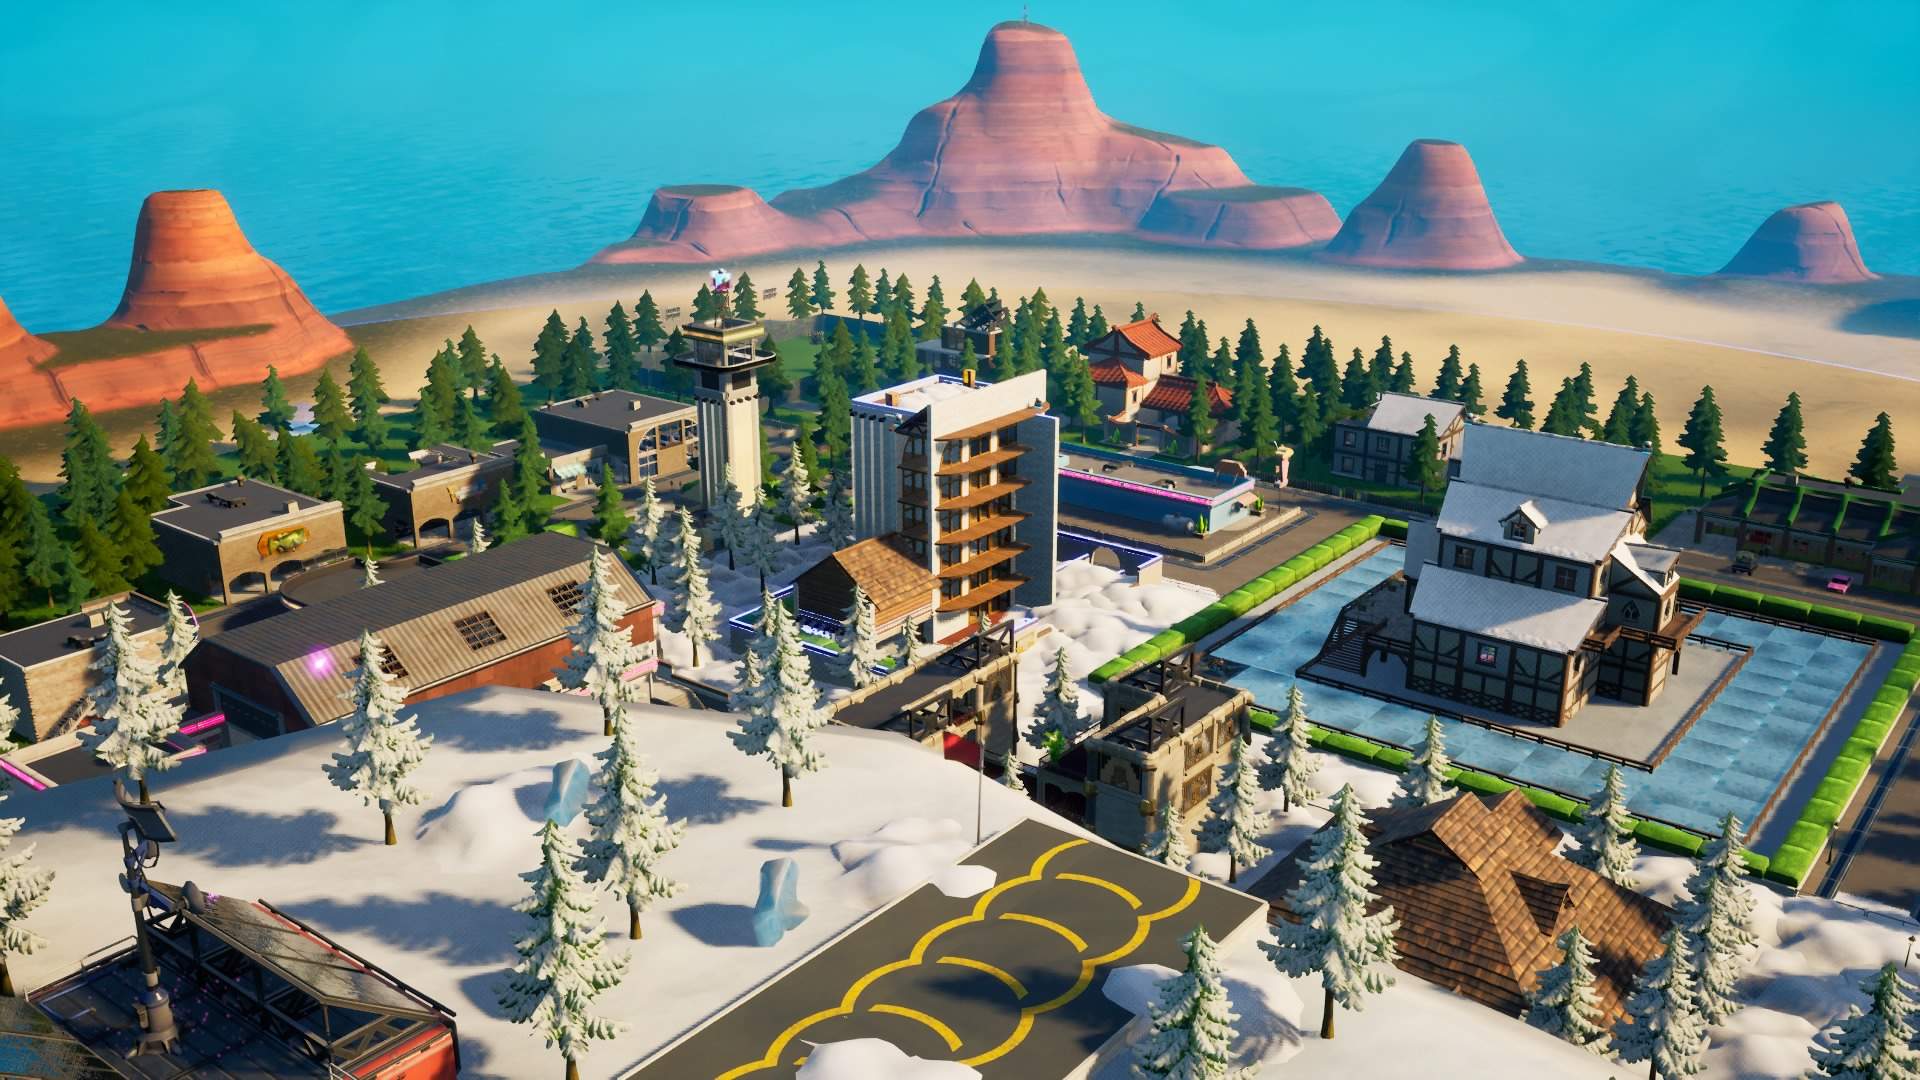 IO TOWN 3717-0407-9718 by todrs - Fortnite Creative Map Code